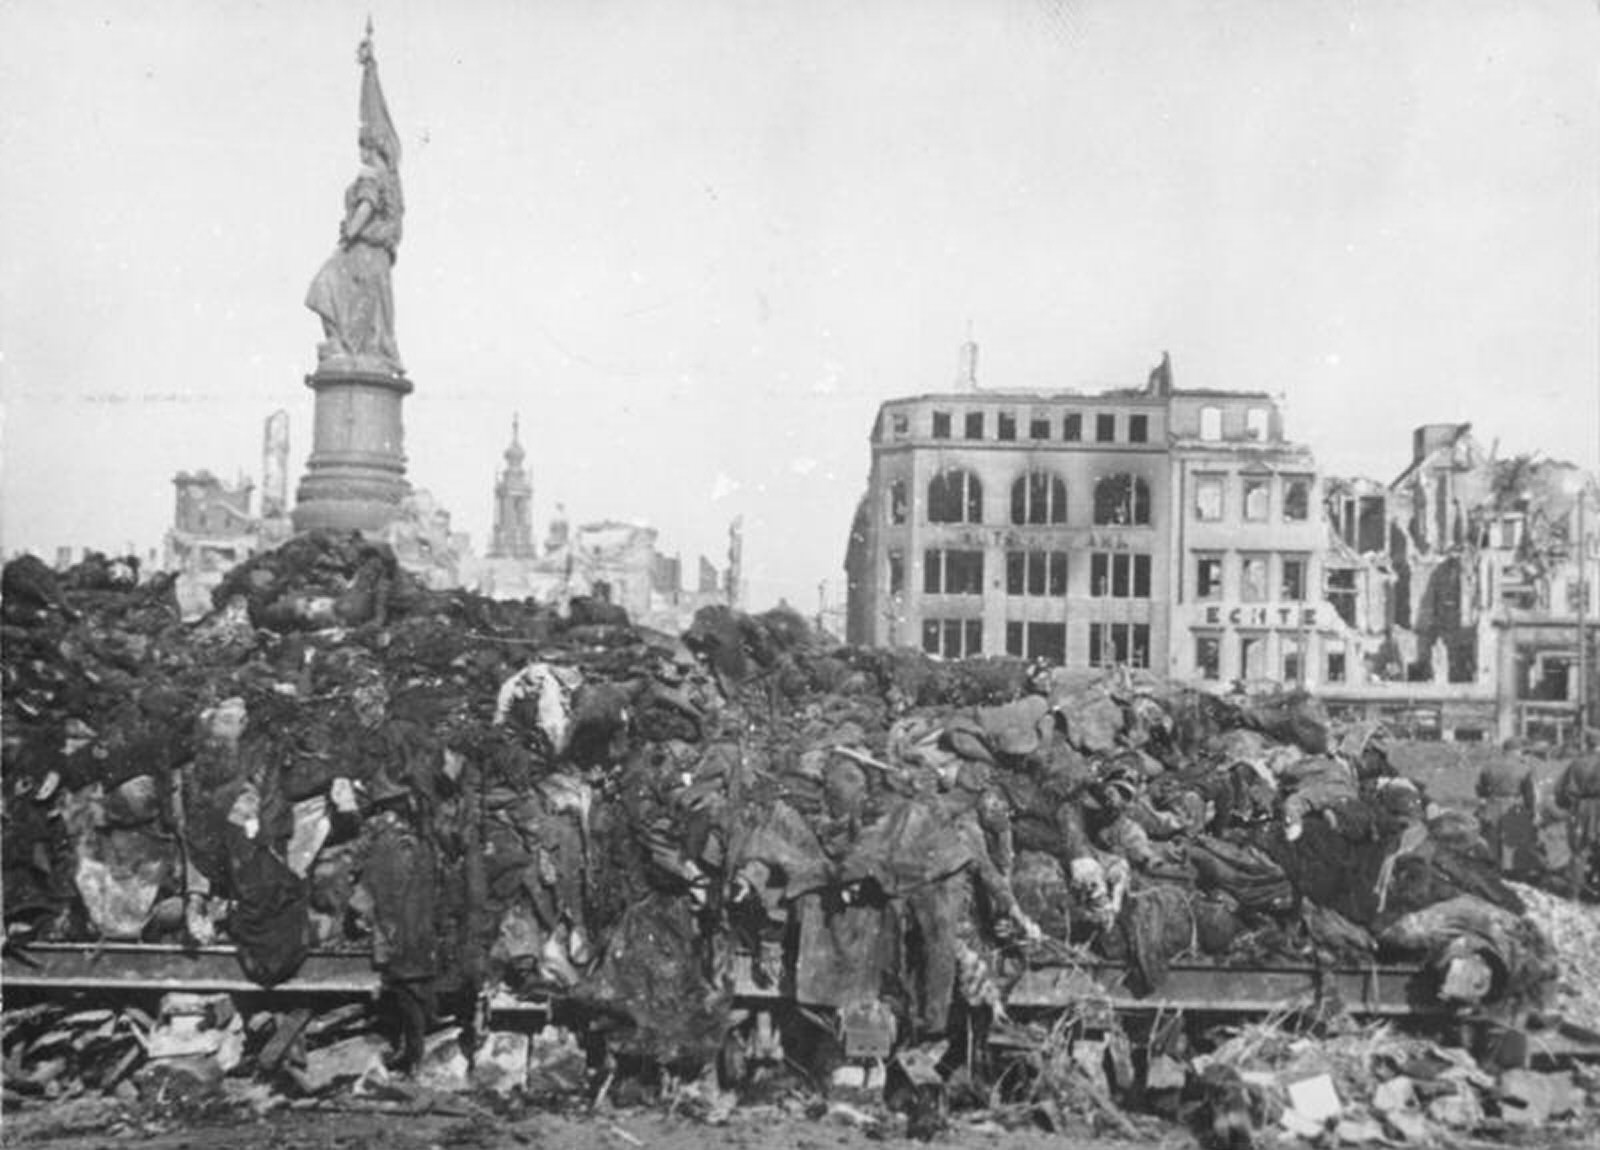 A pile of bodies awaits cremation after the firebombing of Dresden, February 1945.